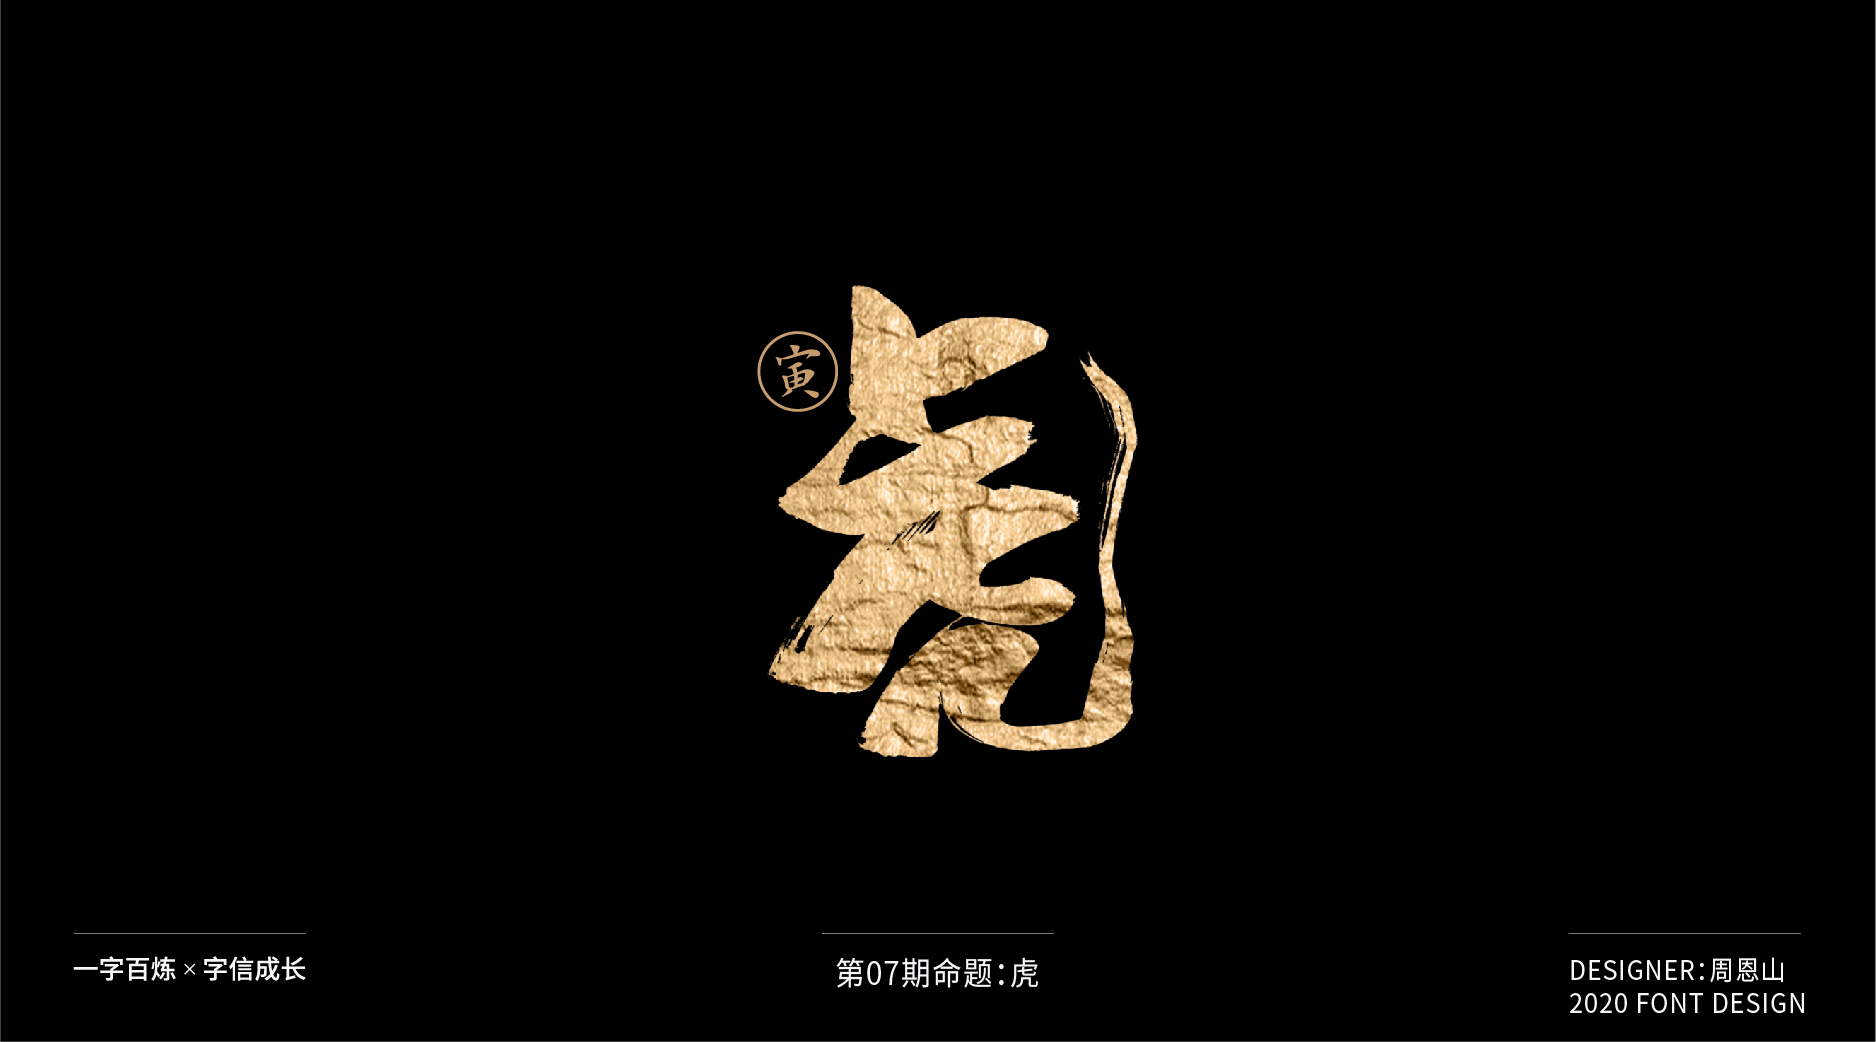 Interesting Chinese Creative Font Design-Tiger: 100 words (100 groups)